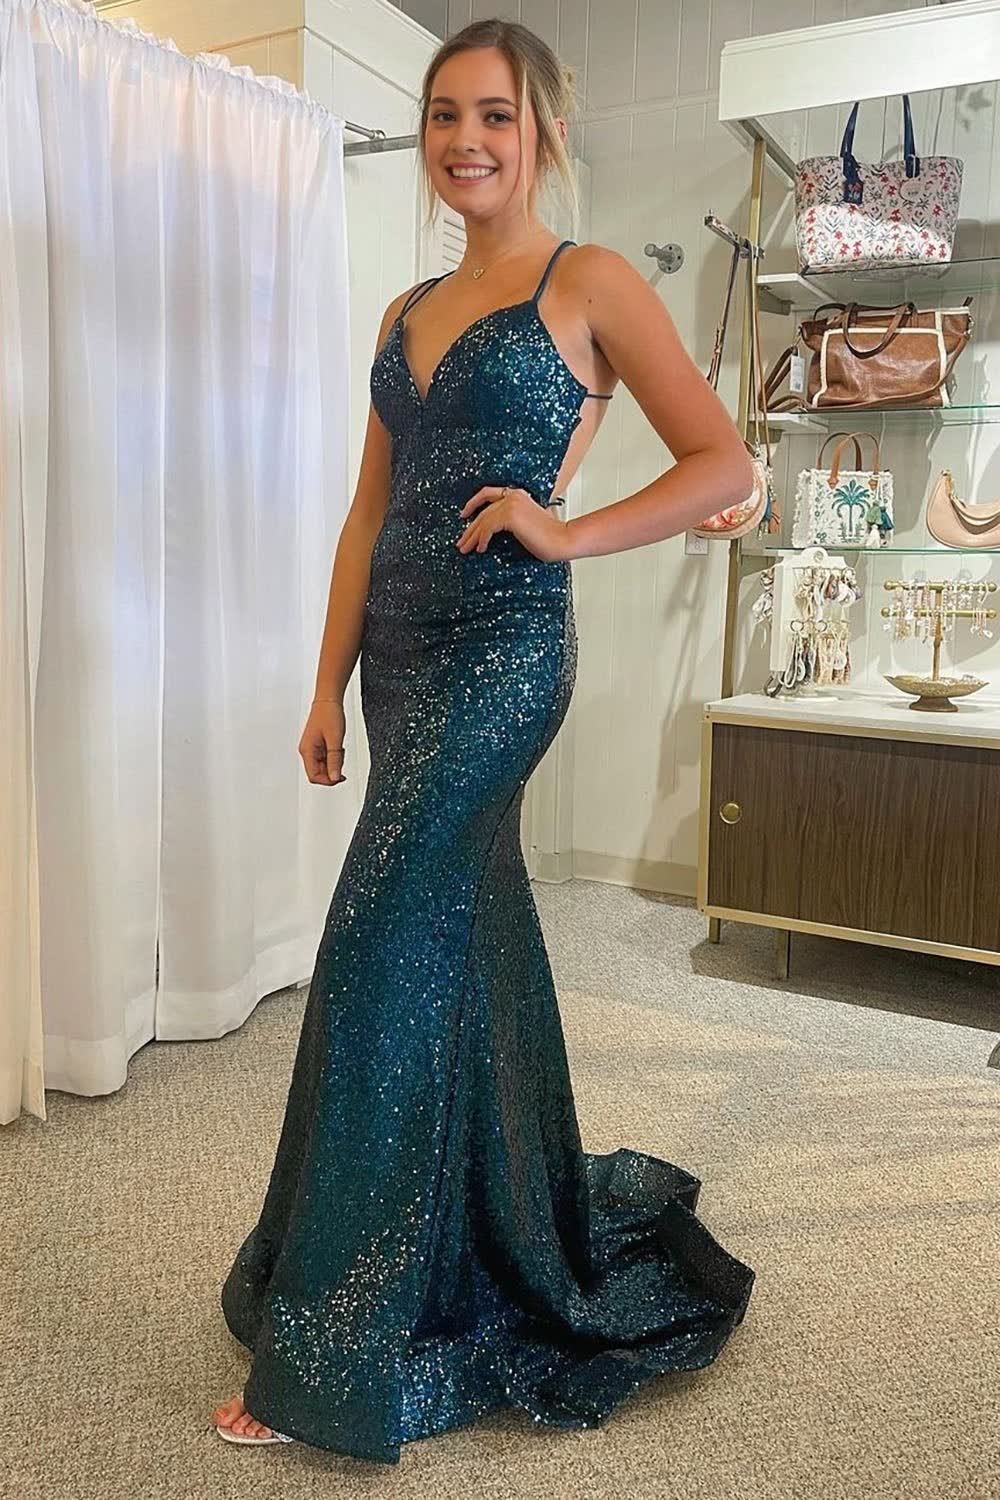 Sparkly Dark Green Mermaid Sequins Long Corset Prom Dress with Lace-Up Back Gowns, Sparkly Dark Green Mermaid Sequins Long Prom Dress with Lace-Up Back